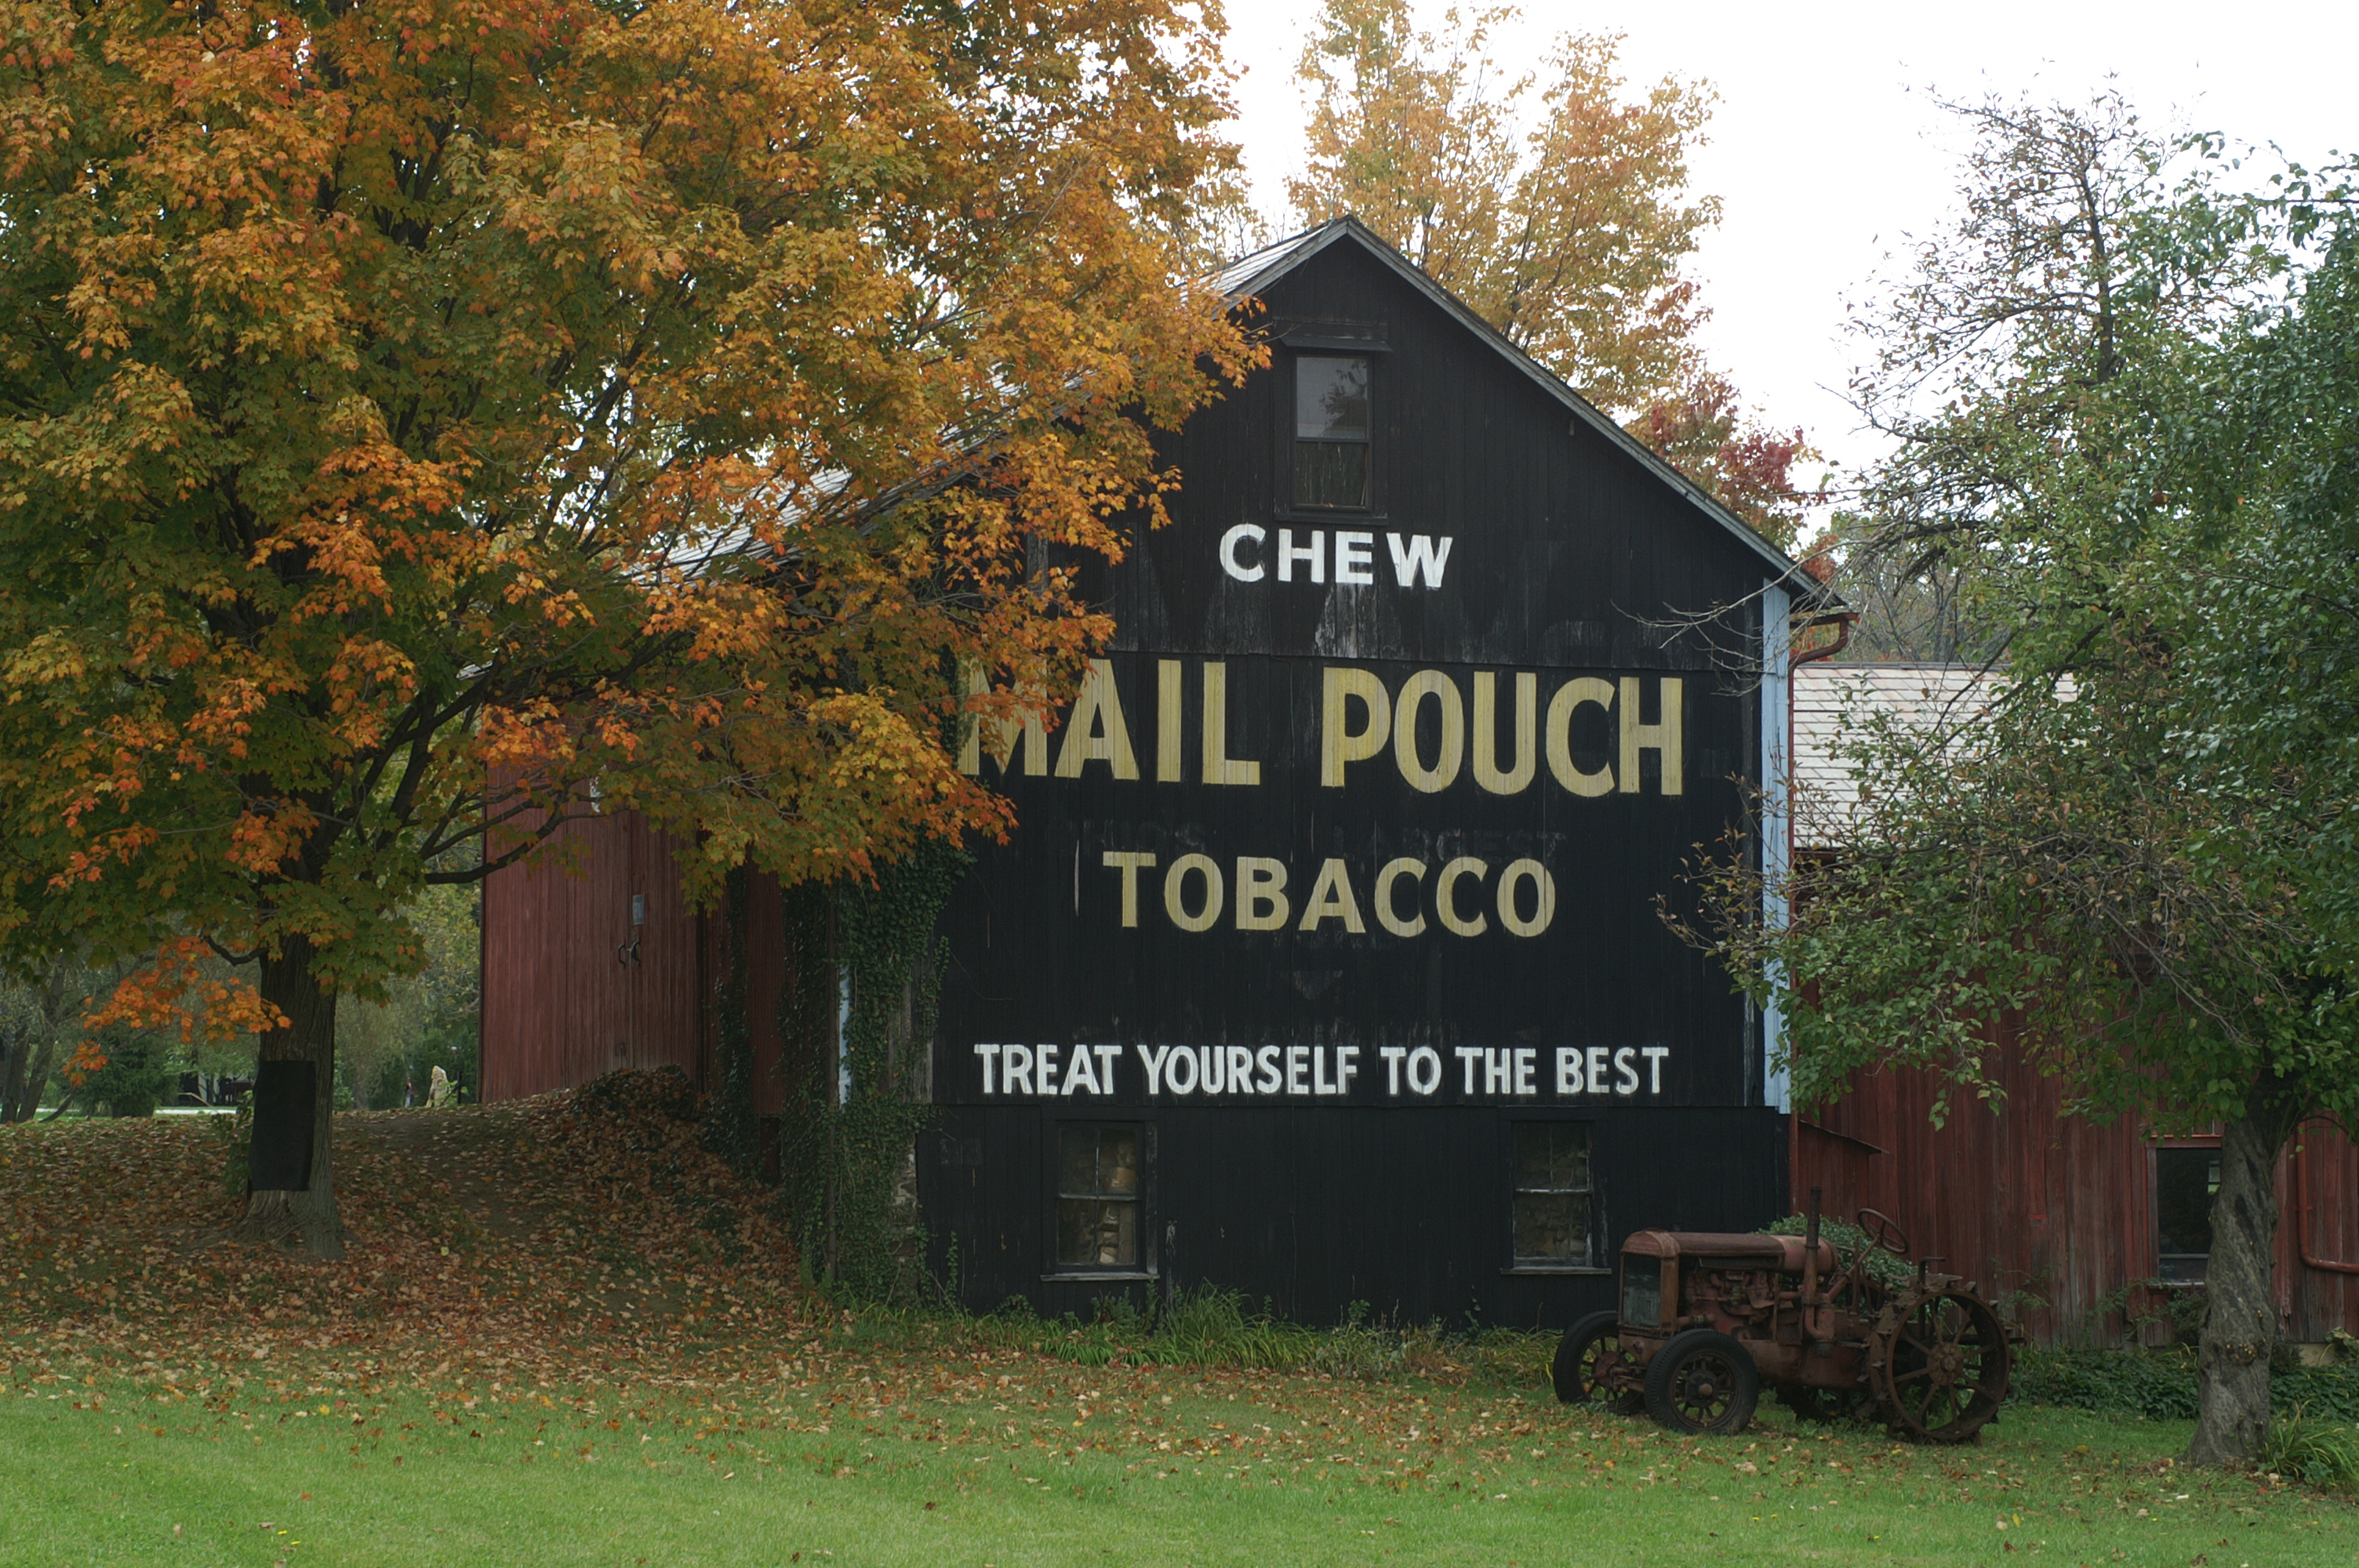 Mail Pouch Tobacco barn advertisement - along Ohio State Route 88 near Ravenna, Ohio USA - October 18, 2007